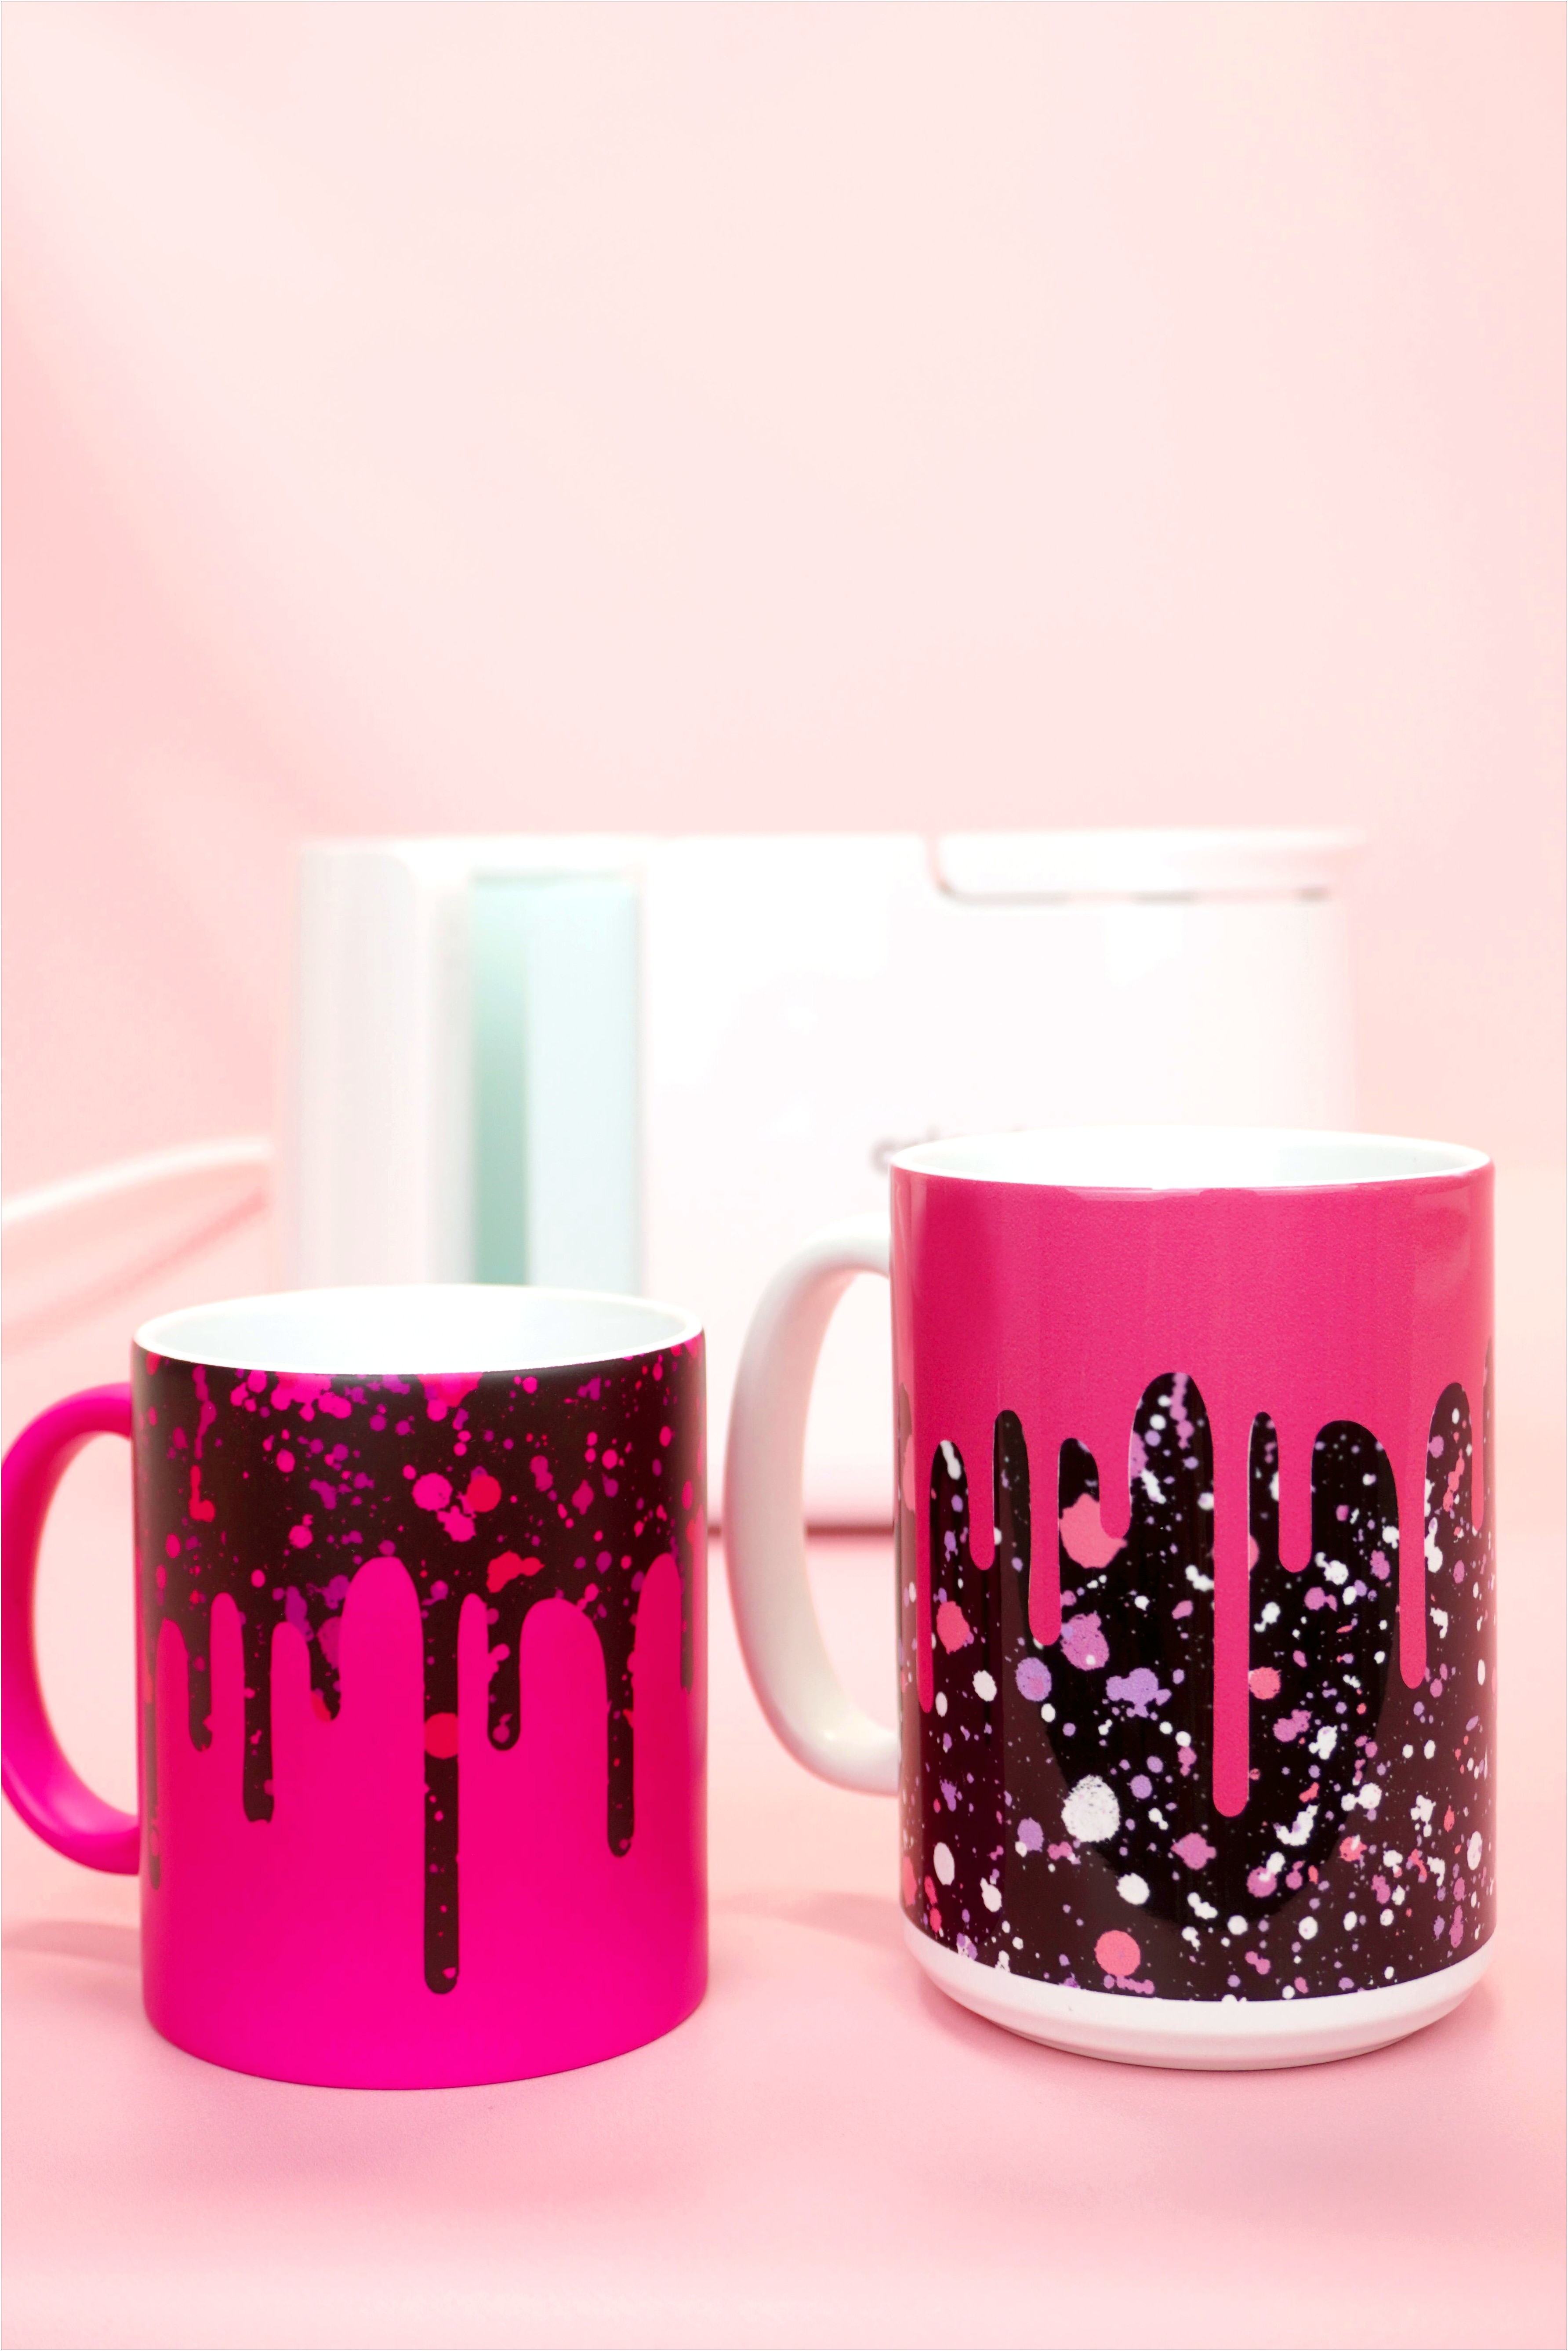 Cricut Templates Free For A Cup